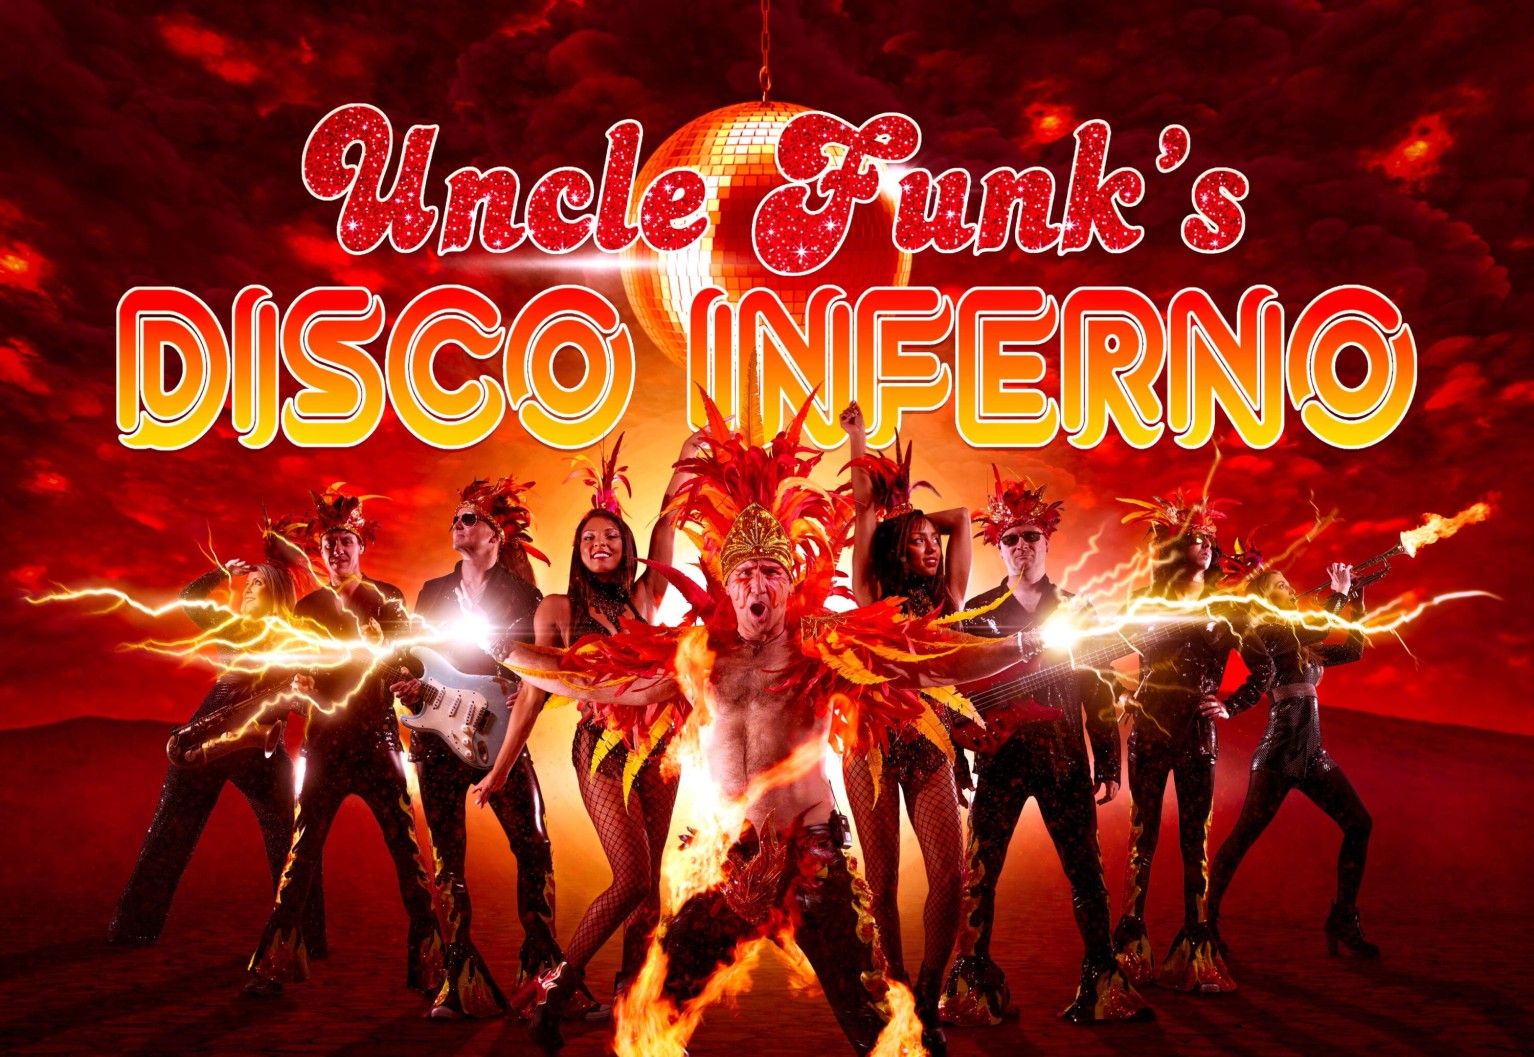 Christmas Party Night featuring Uncle Funk's Disco Inferno